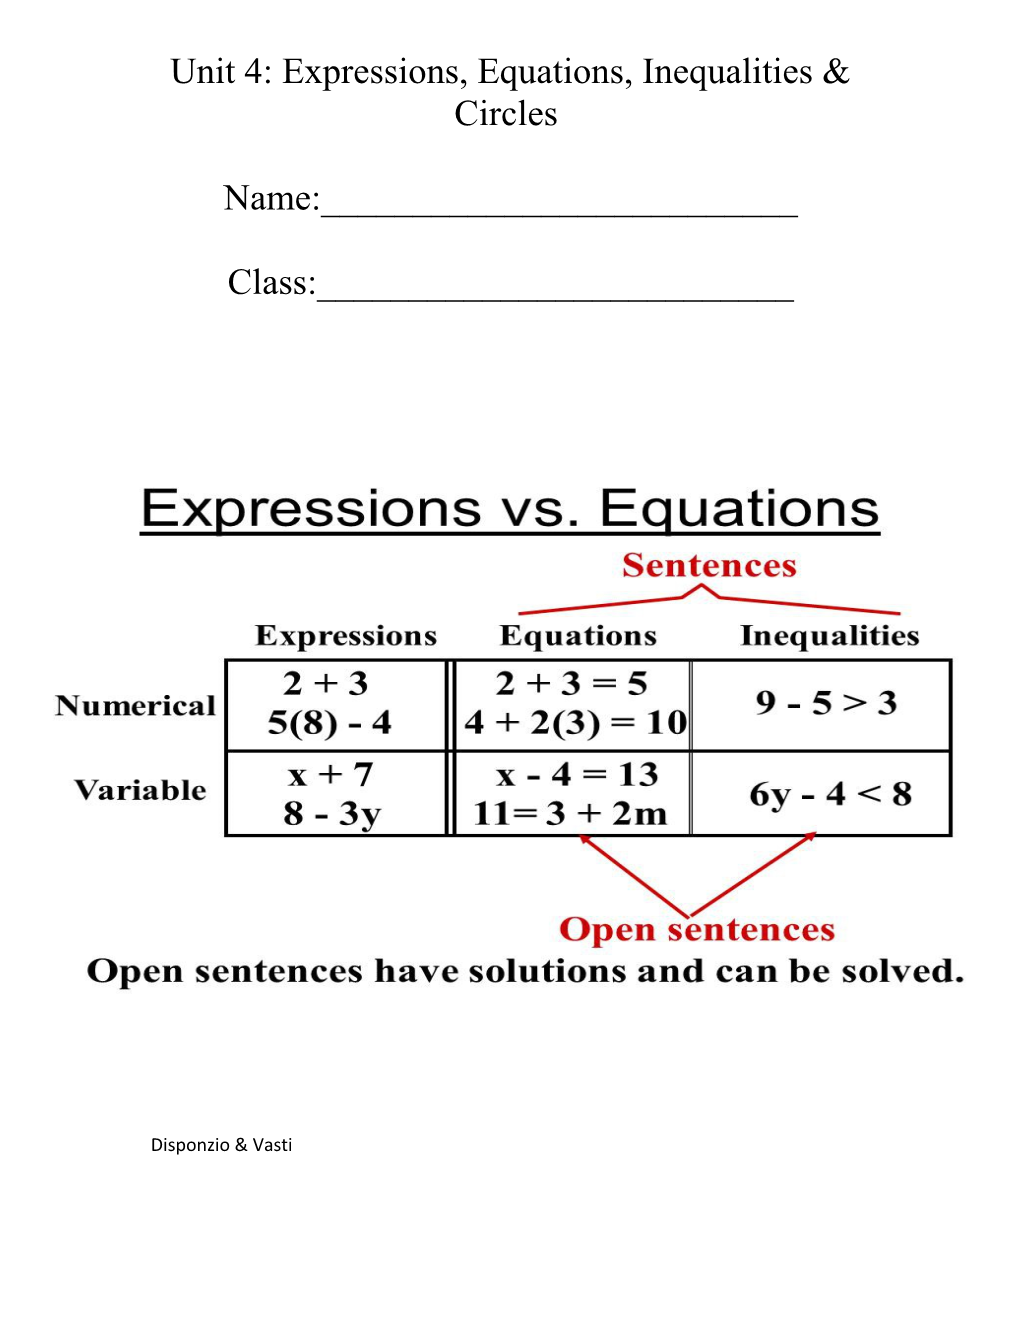 Unit 4: Expressions, Equations, Inequalities & Circles